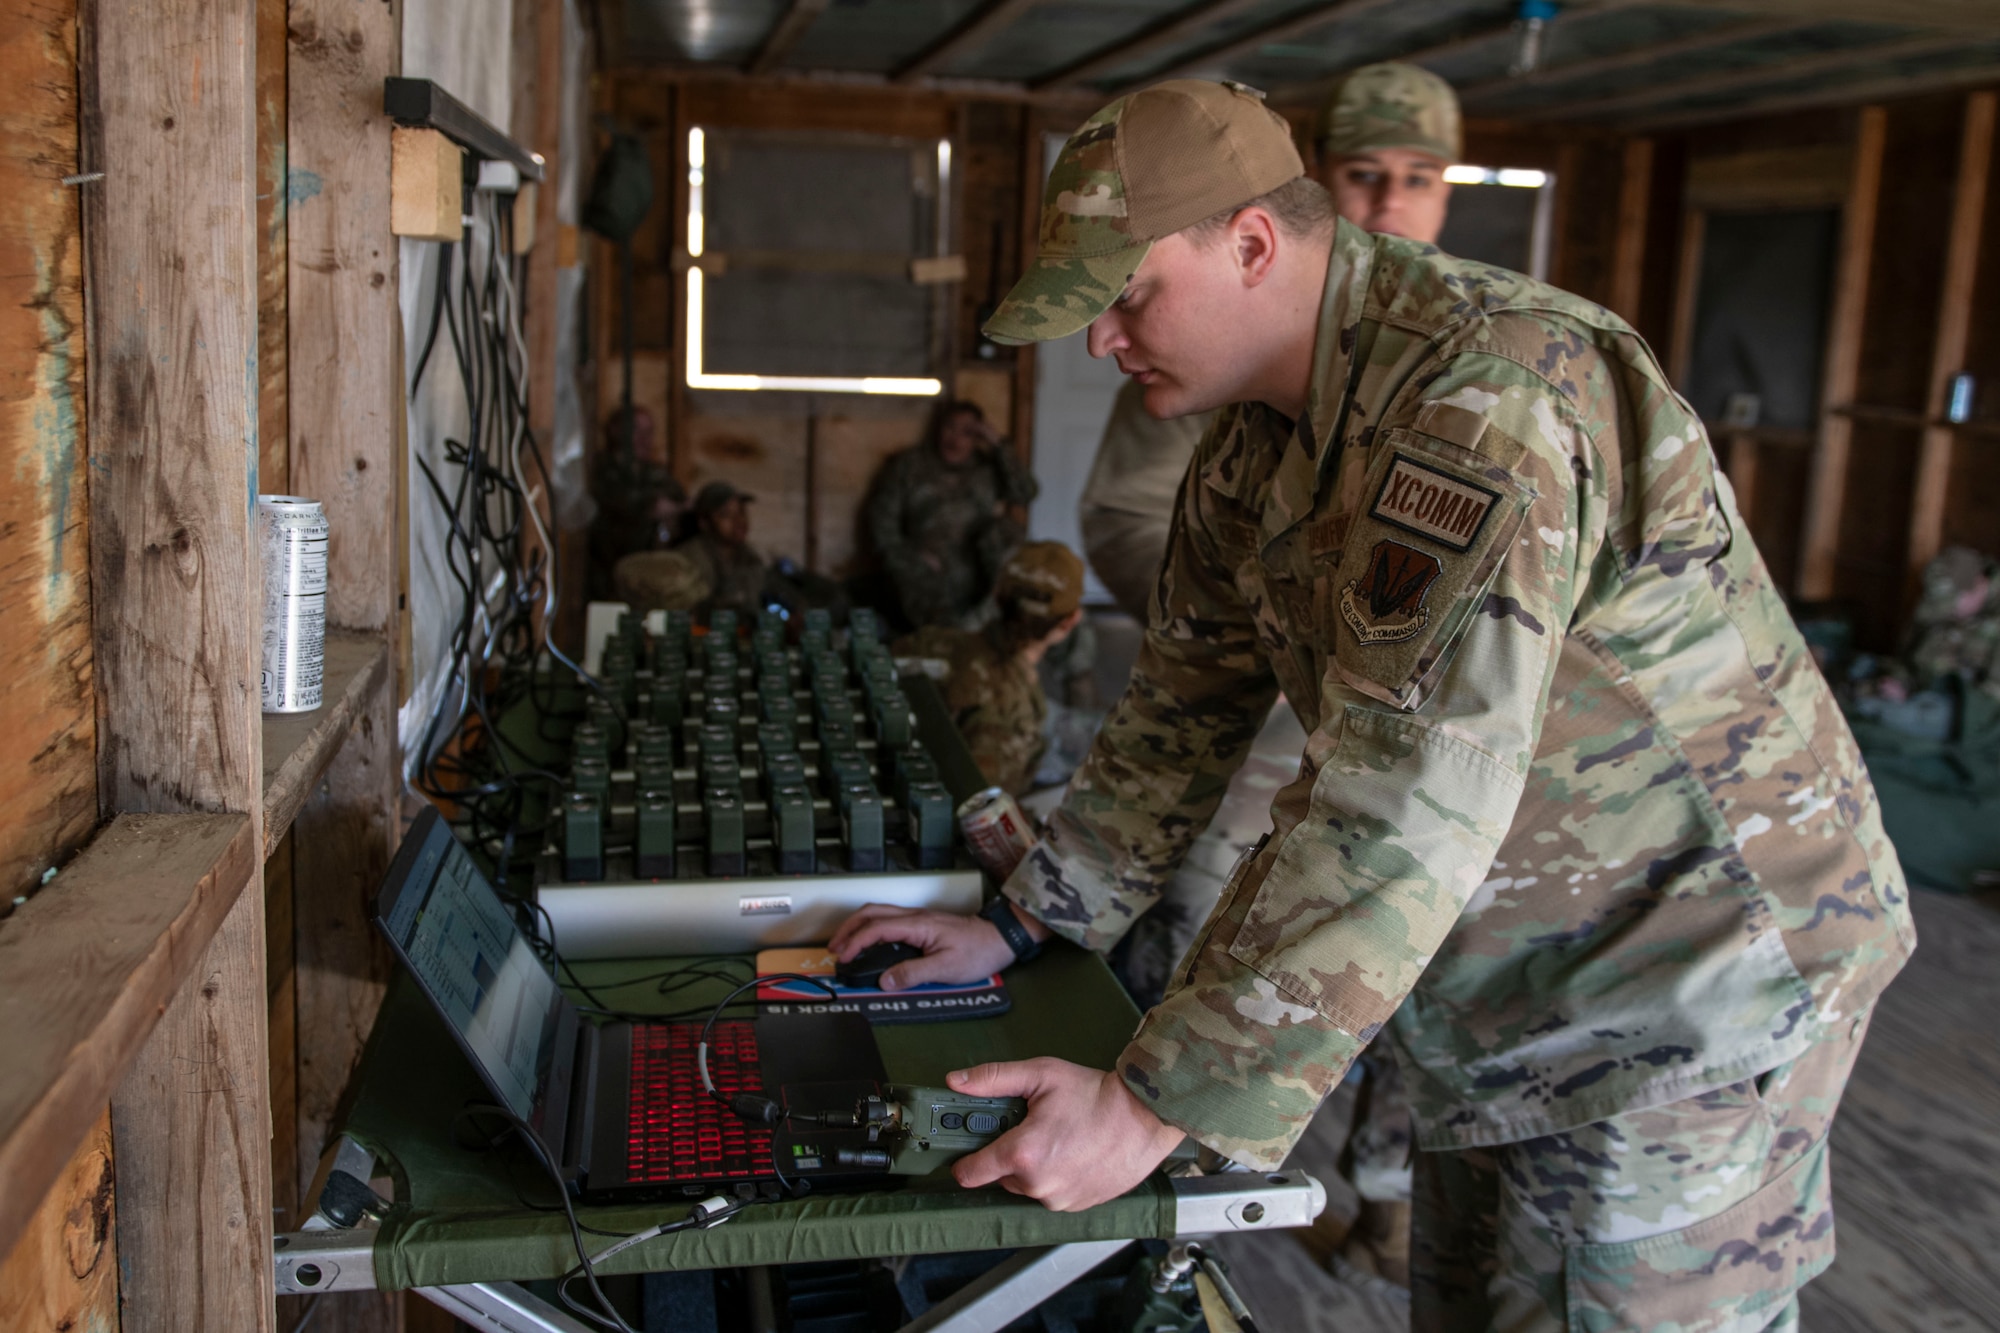 TSgt. Schrader, a Guard Airmen of the 182nd Airlift Wing, conducted a radio check during phase 2 of the Spartan Reserve exercise on April 6th, 2024 at Sparta Training Area, Illinois. The Spartan Phase II exercise demonstrated strength, teamwork, and efficiency through collaborative efforts during the Spartan Reserve Phase II exercise.(U.S. Air Force photo by Staff Sgt. Brooke Spenner)